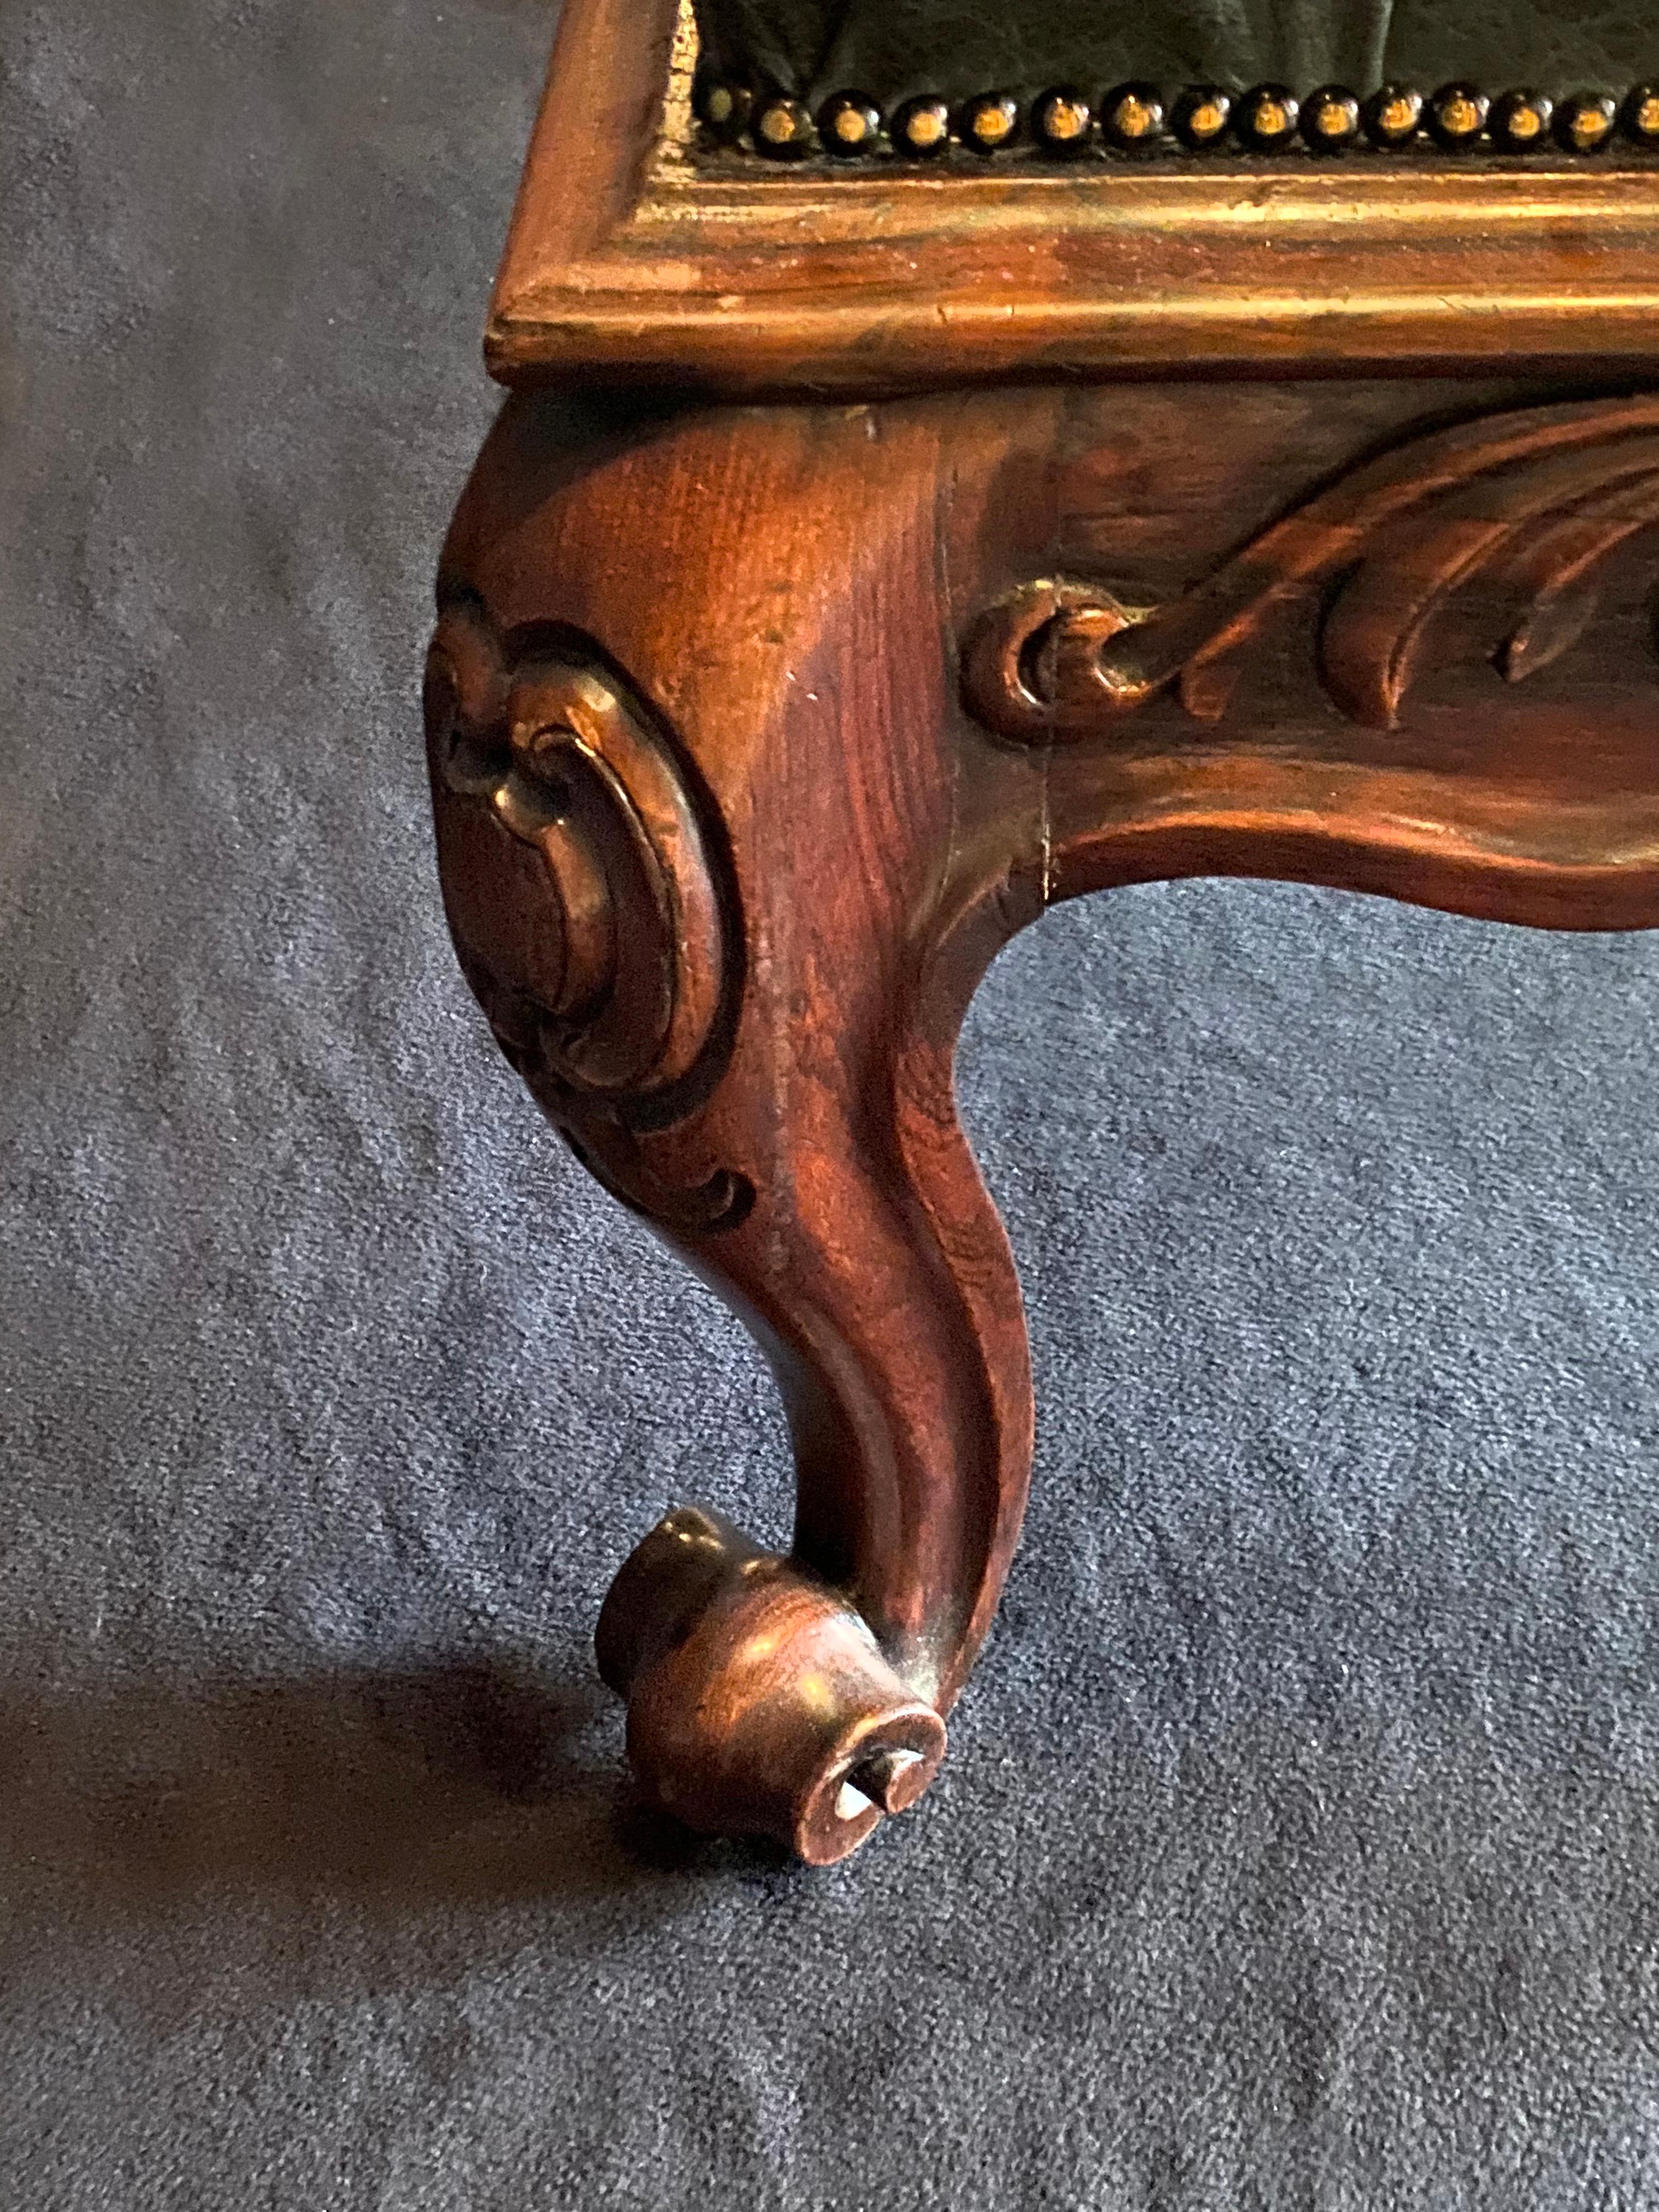 A superb quality mid 19th century rosewood salon stool of Rococo revival style. The frieze is eye-catching with intricate cavetto carved moulding - it is a wonderful example of the Rococo revival style which epitomised grandeur and luxury in